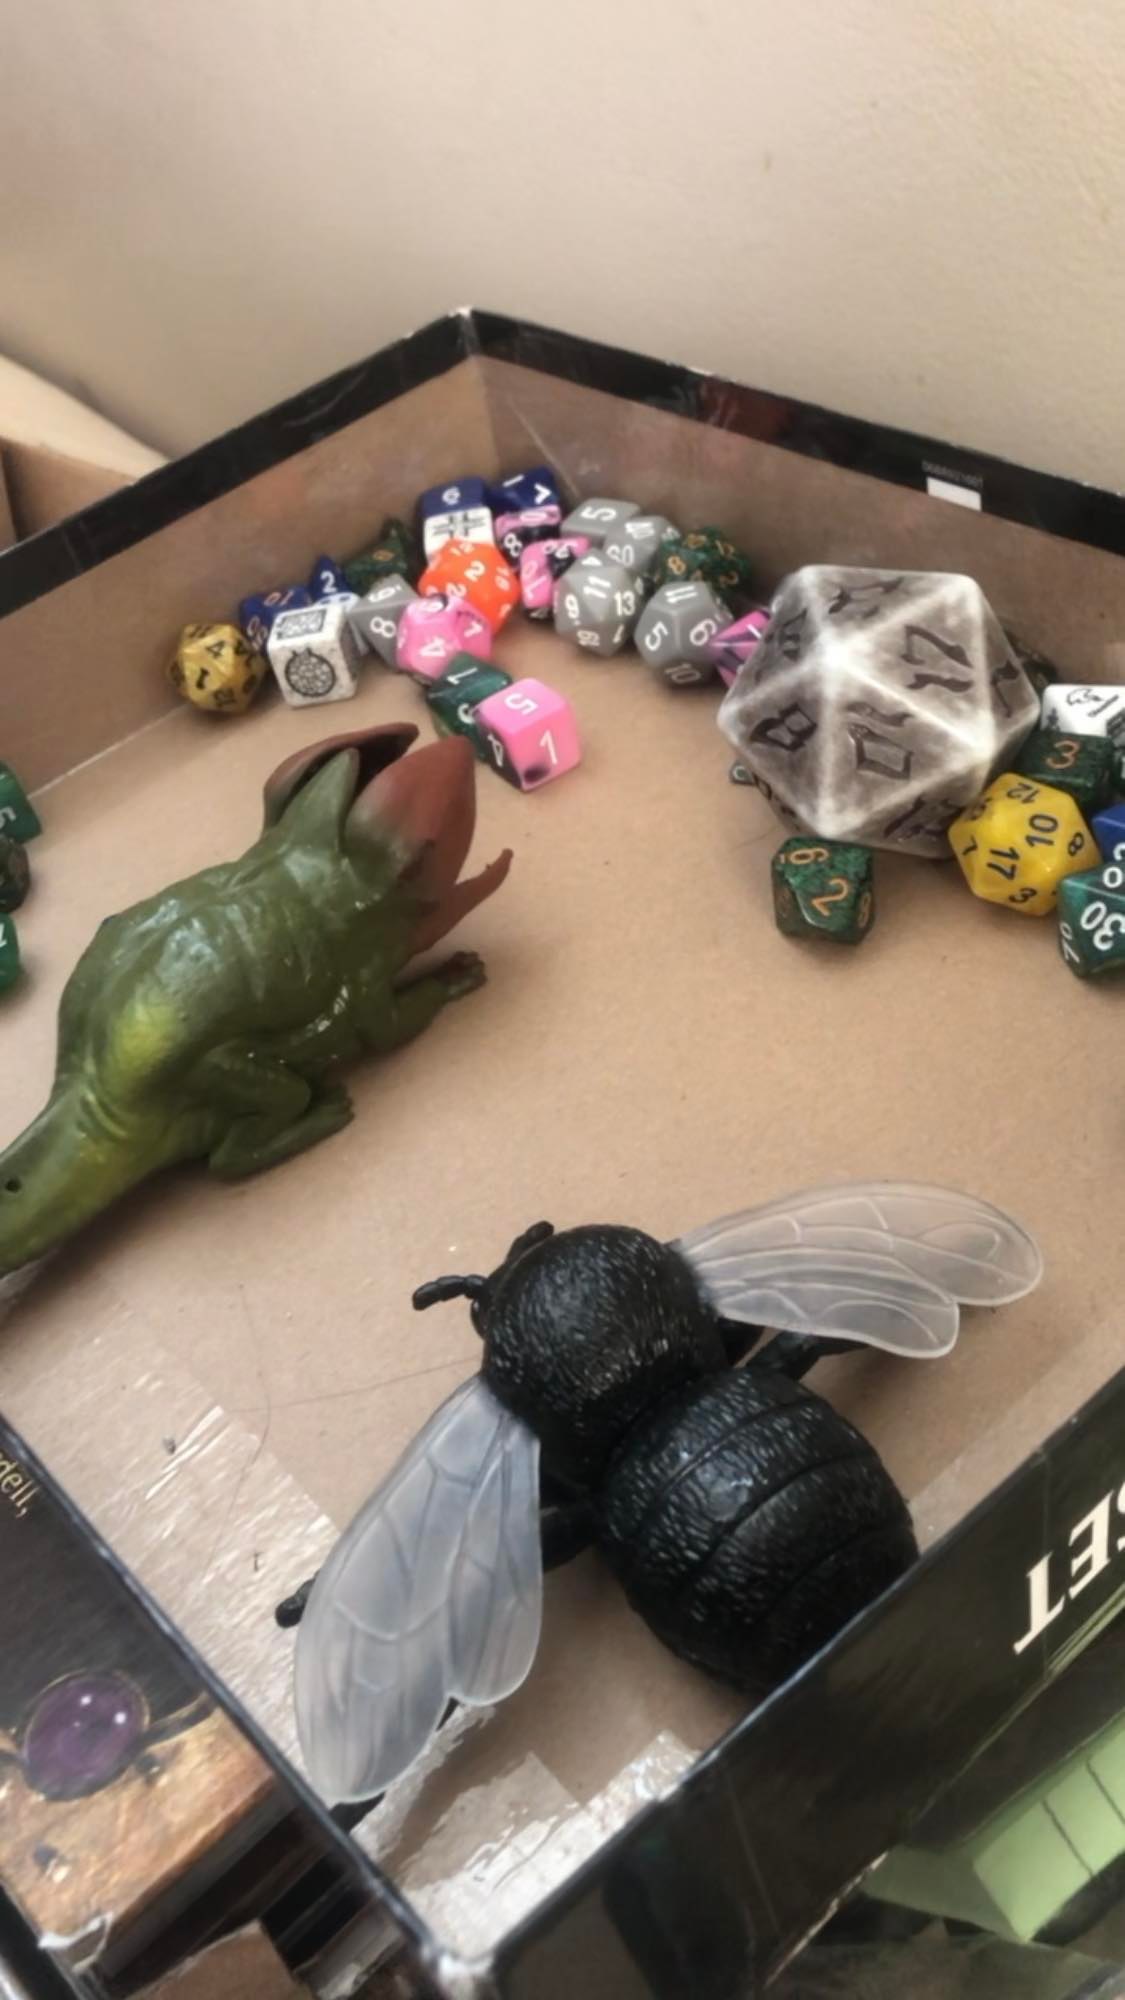 Lotus, the demodog, or baby demogorgon, standing near the delicious looking dice, and Simon, the giant housefly, sitting nearby, watching and guarding the dice box